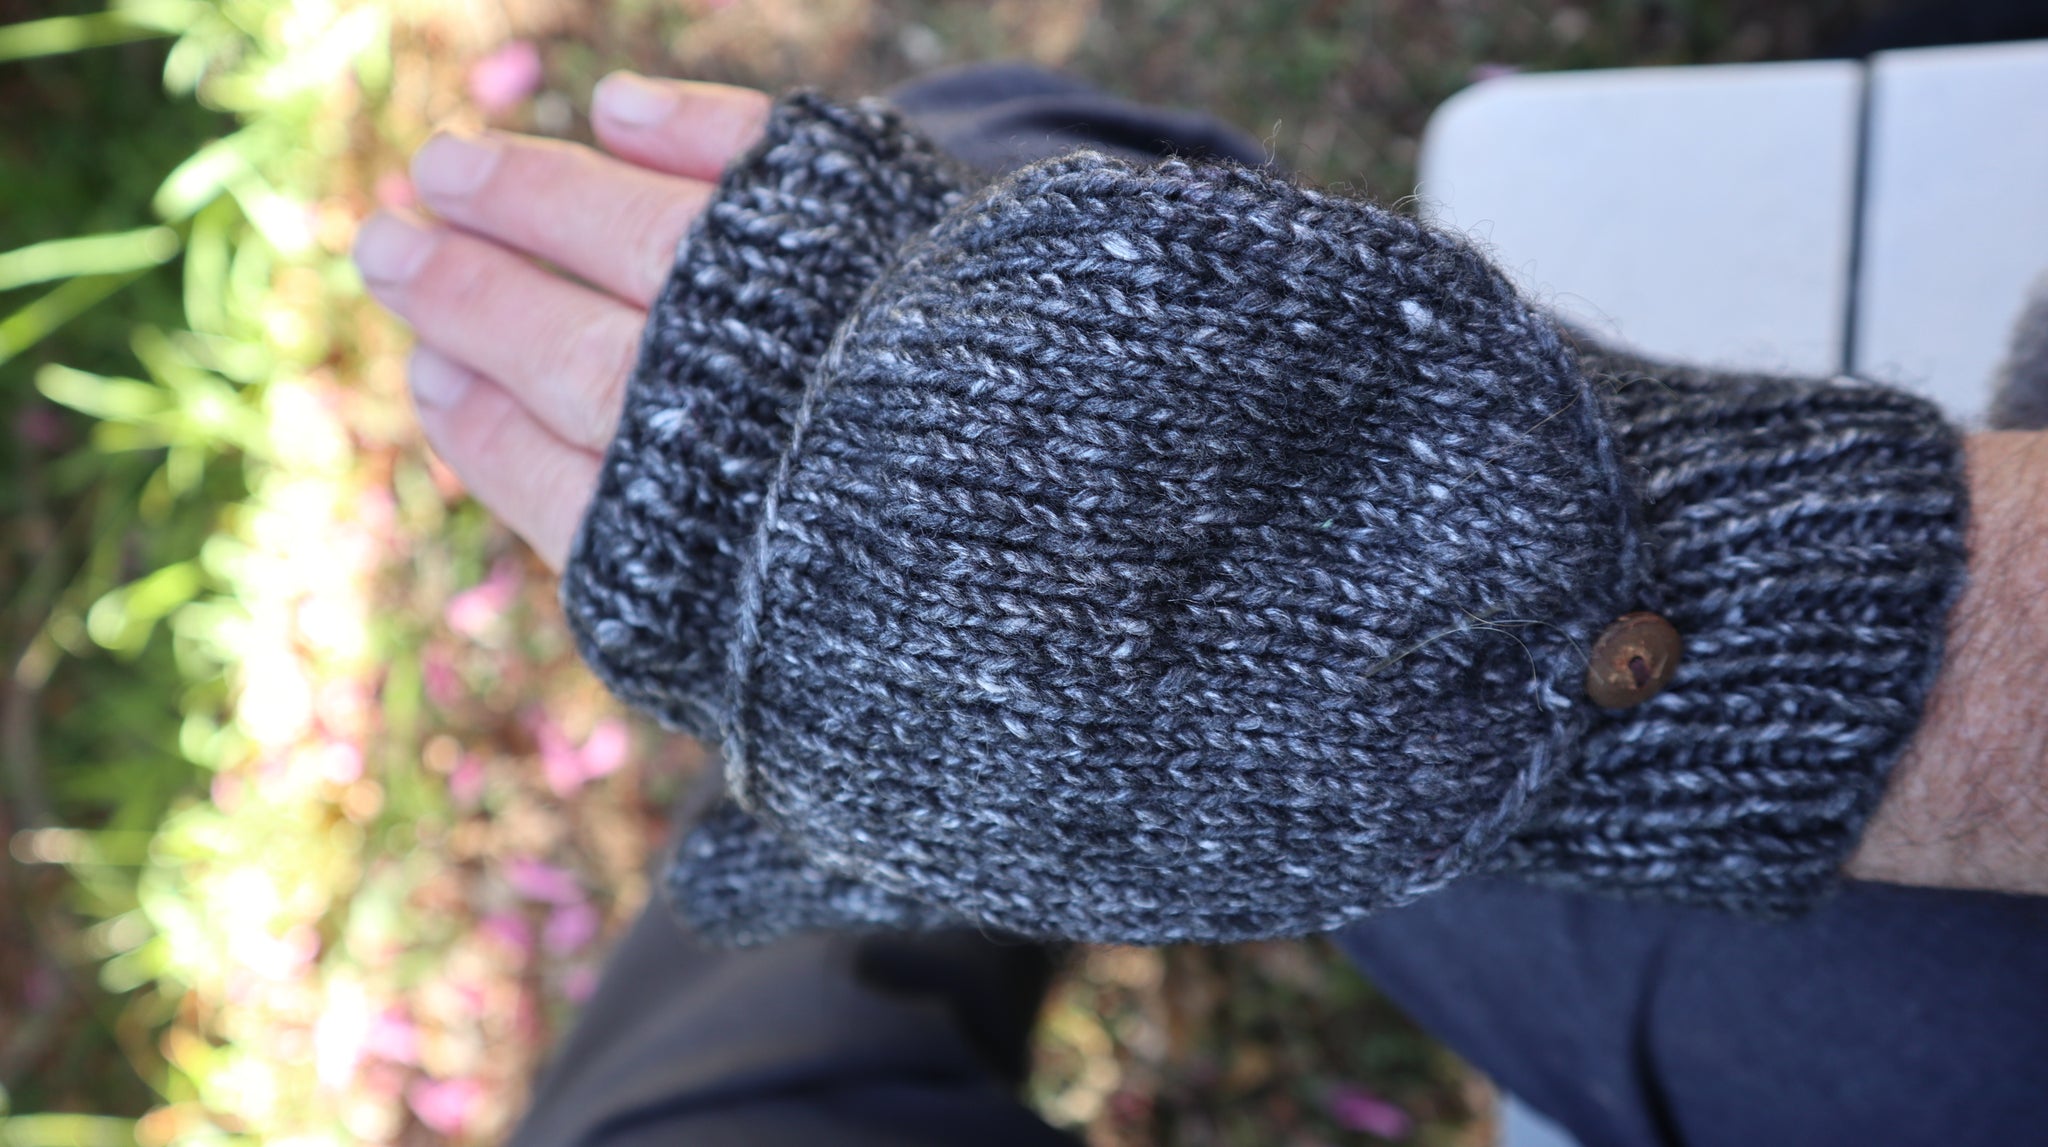 Fair Trade Ethical Adult Fingerless Gloves with Cap in Grey